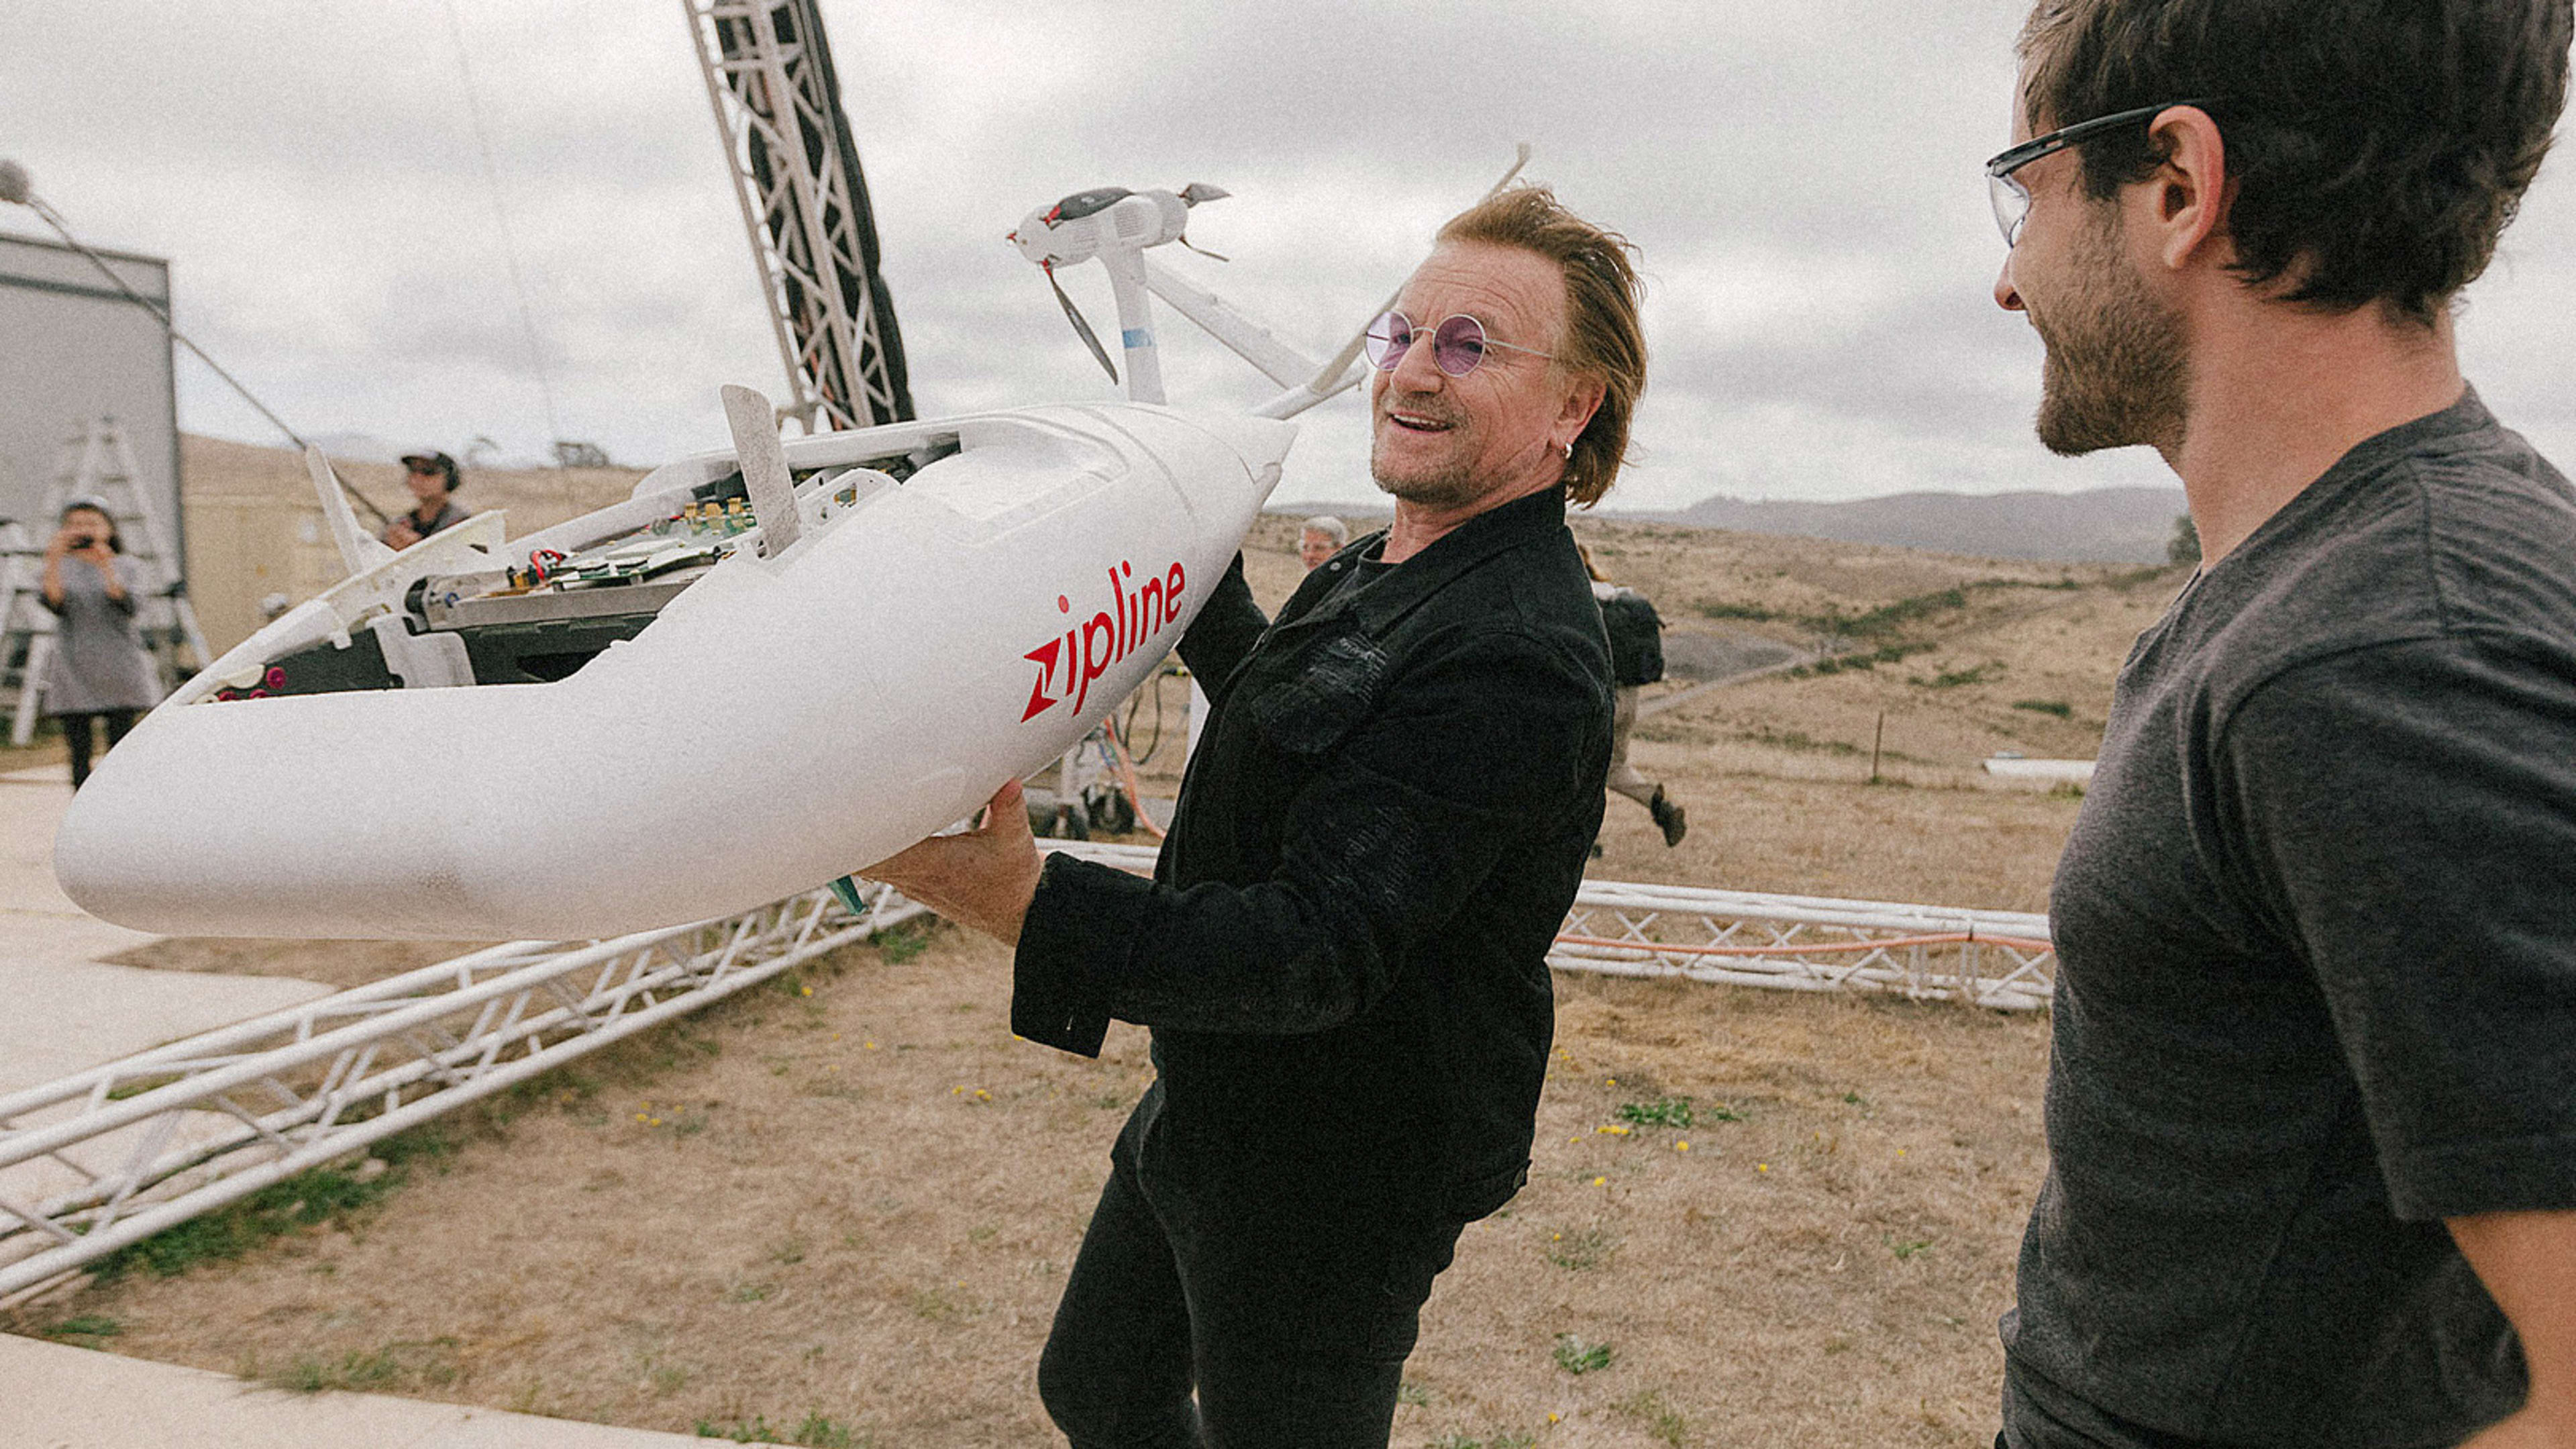 Bono is really into drones now (but it’s good)